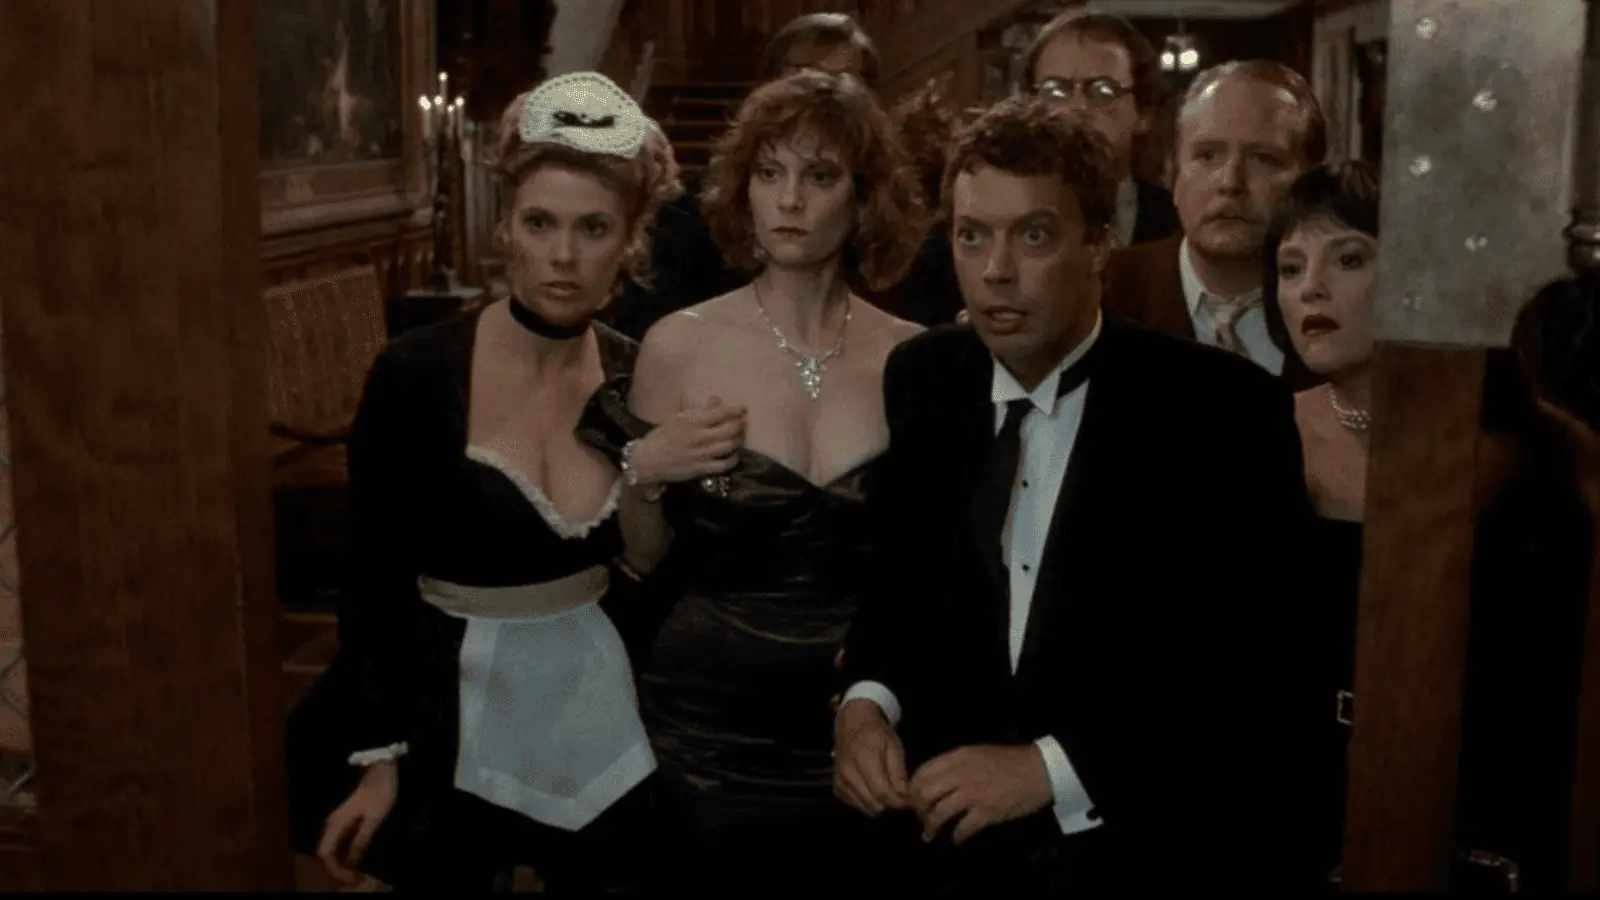 Scene from Clue